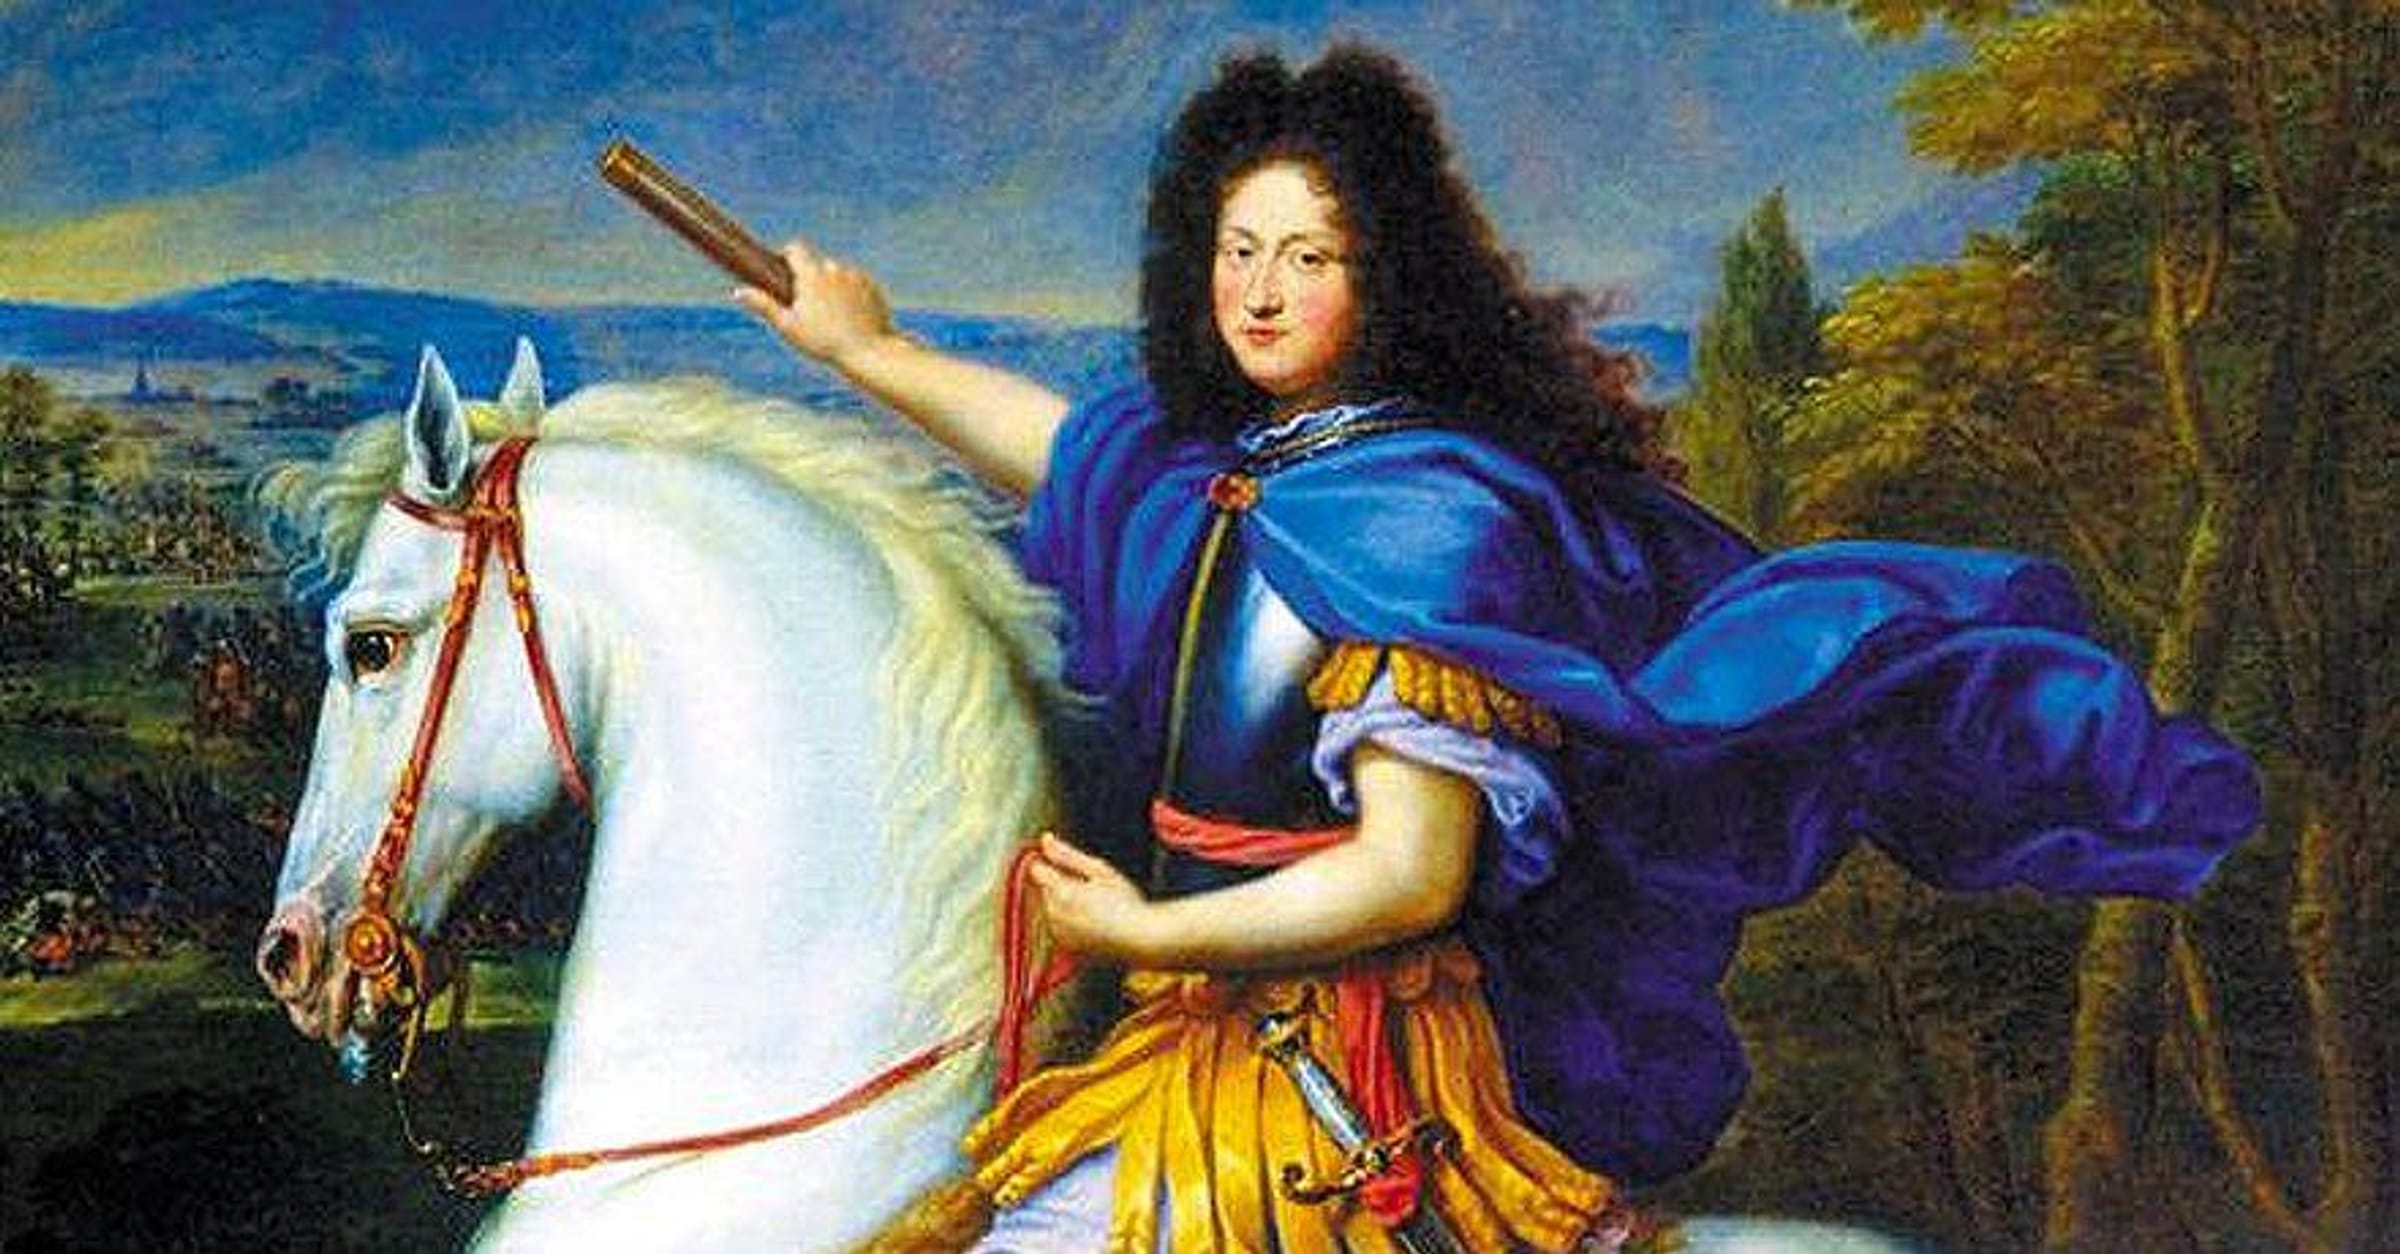 Phillip of France, I Duke of Orléans, son of Louis XIII - The